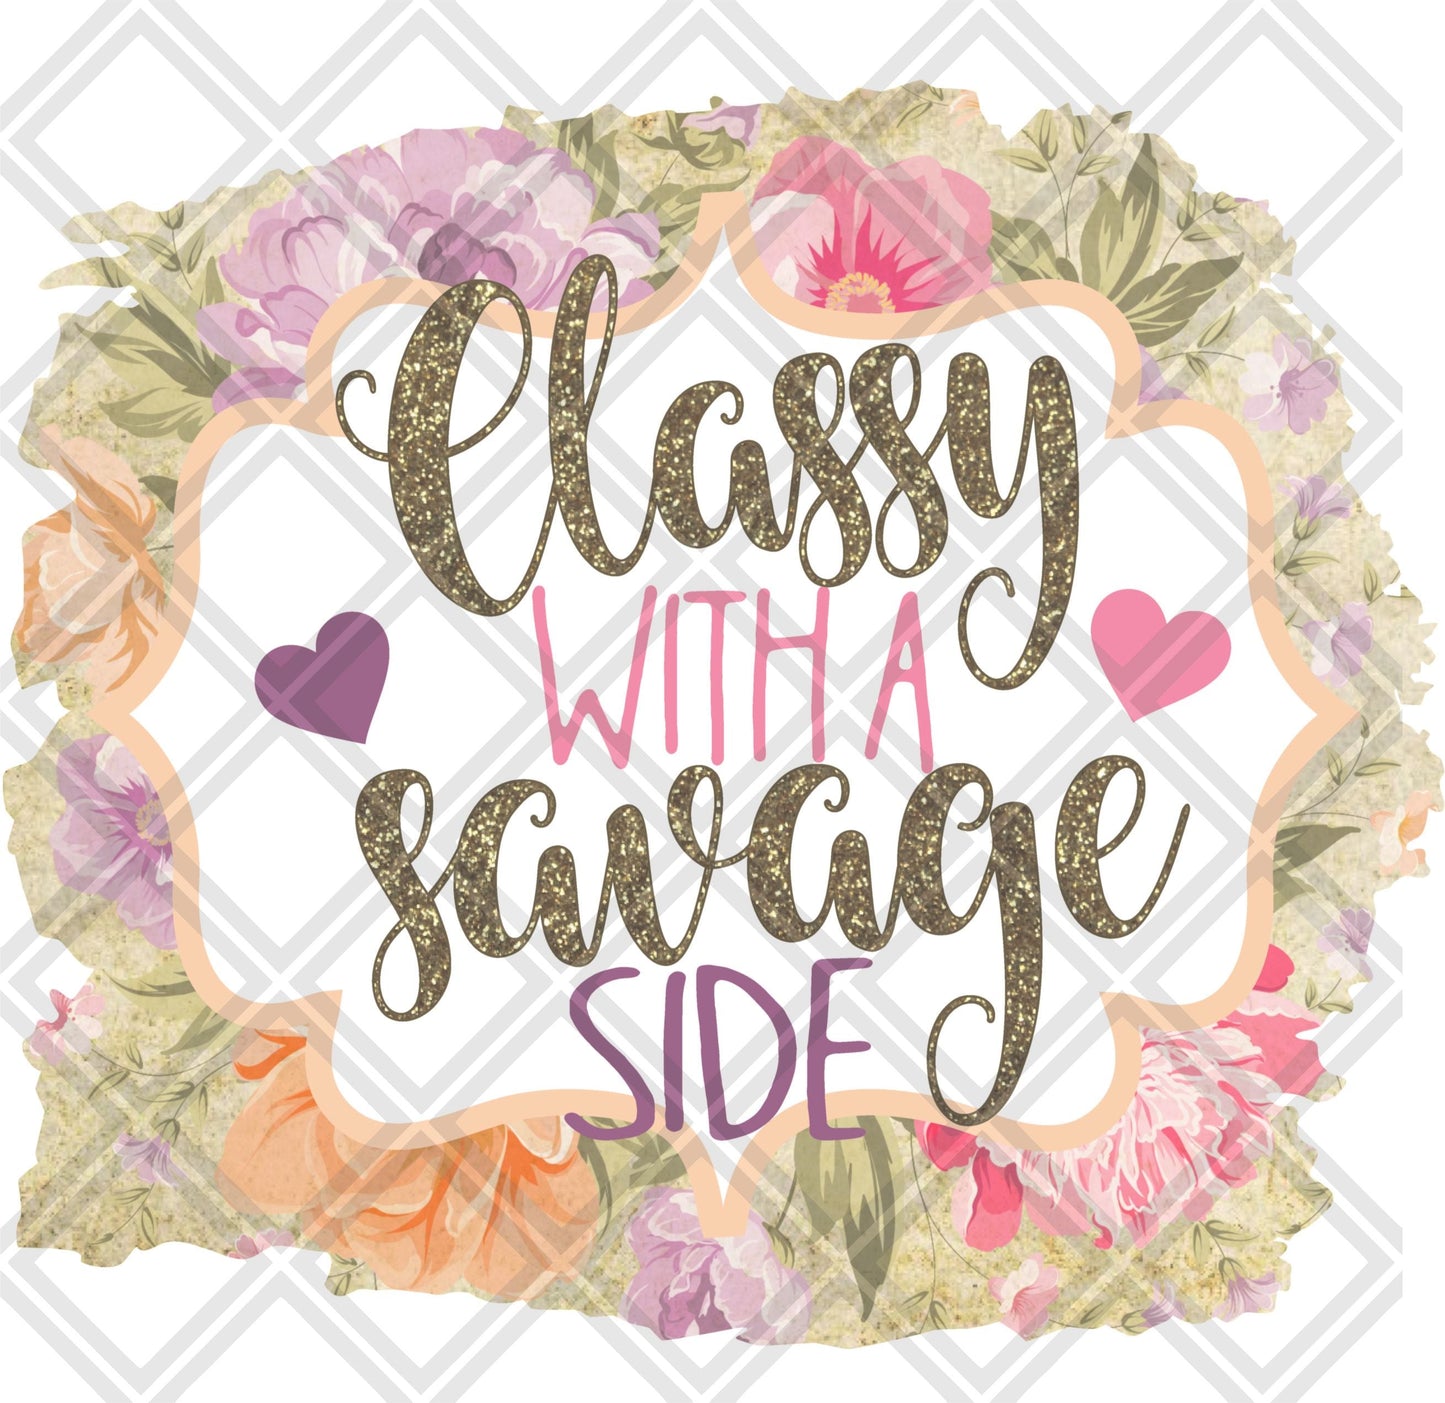 Classy With A Savage Side DTF TRANSFERPRINT TO ORDER